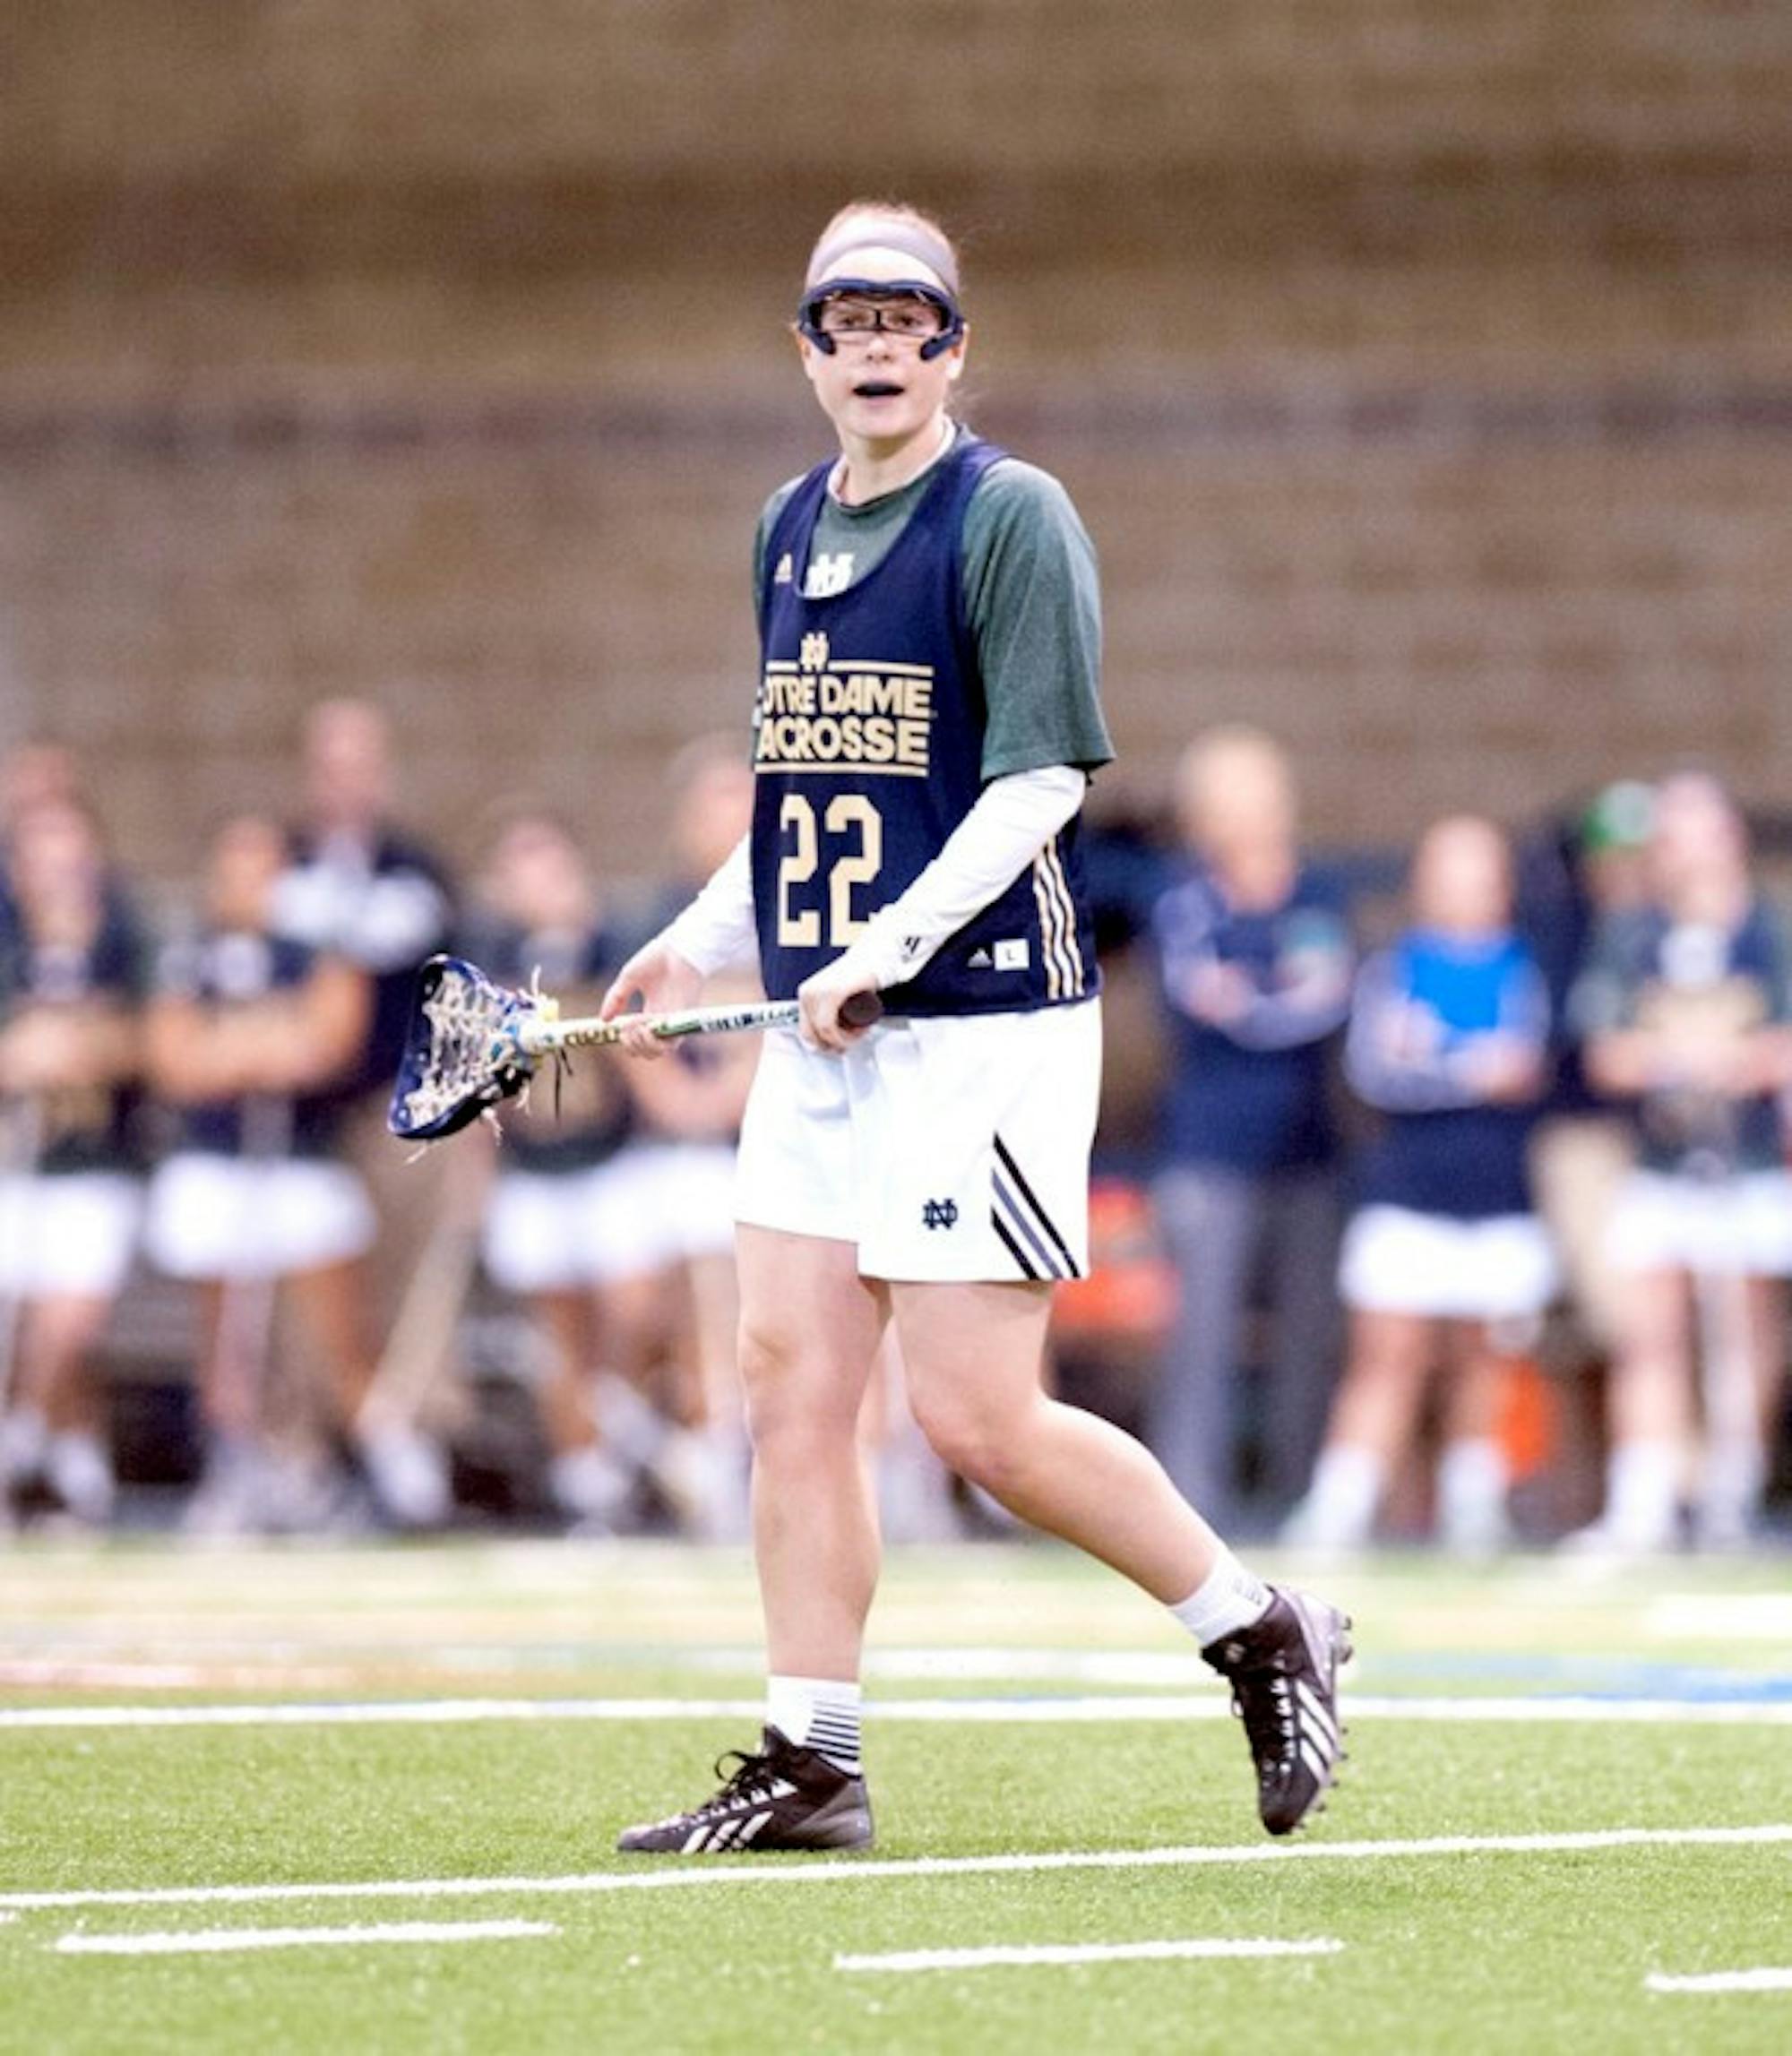 Senior defense Margaret Smith scans the field Feb. 14 against Michigan. Smith is a four-year starter for the Irish.